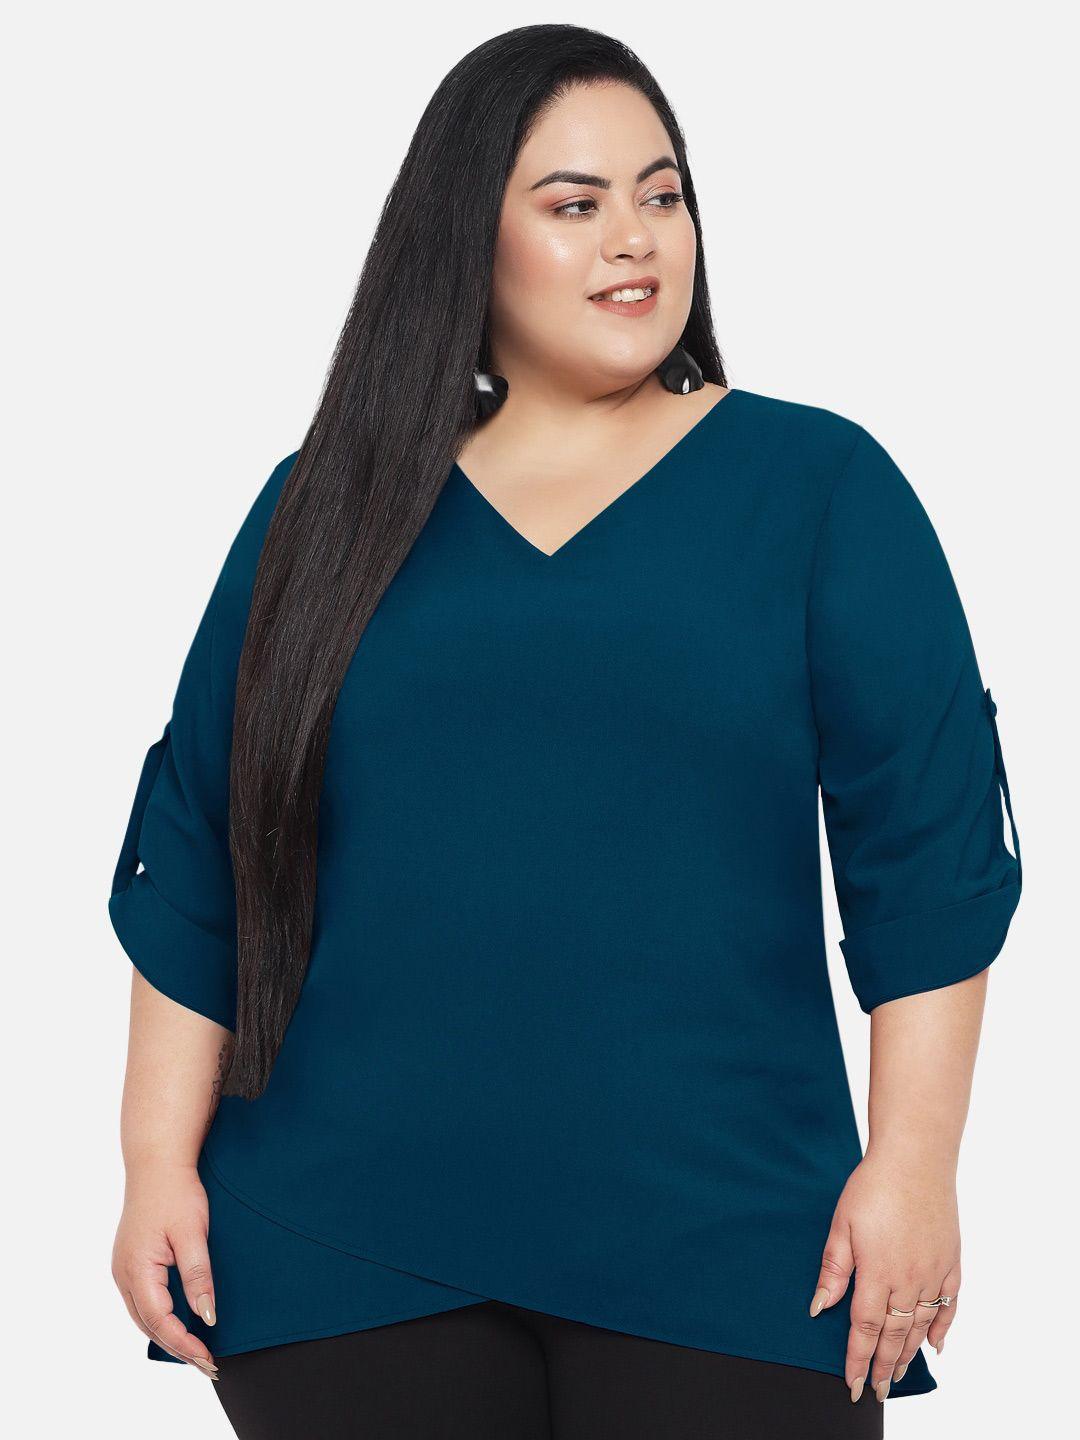 wild u turquoise plus size roll-up sleeves layered crepe top